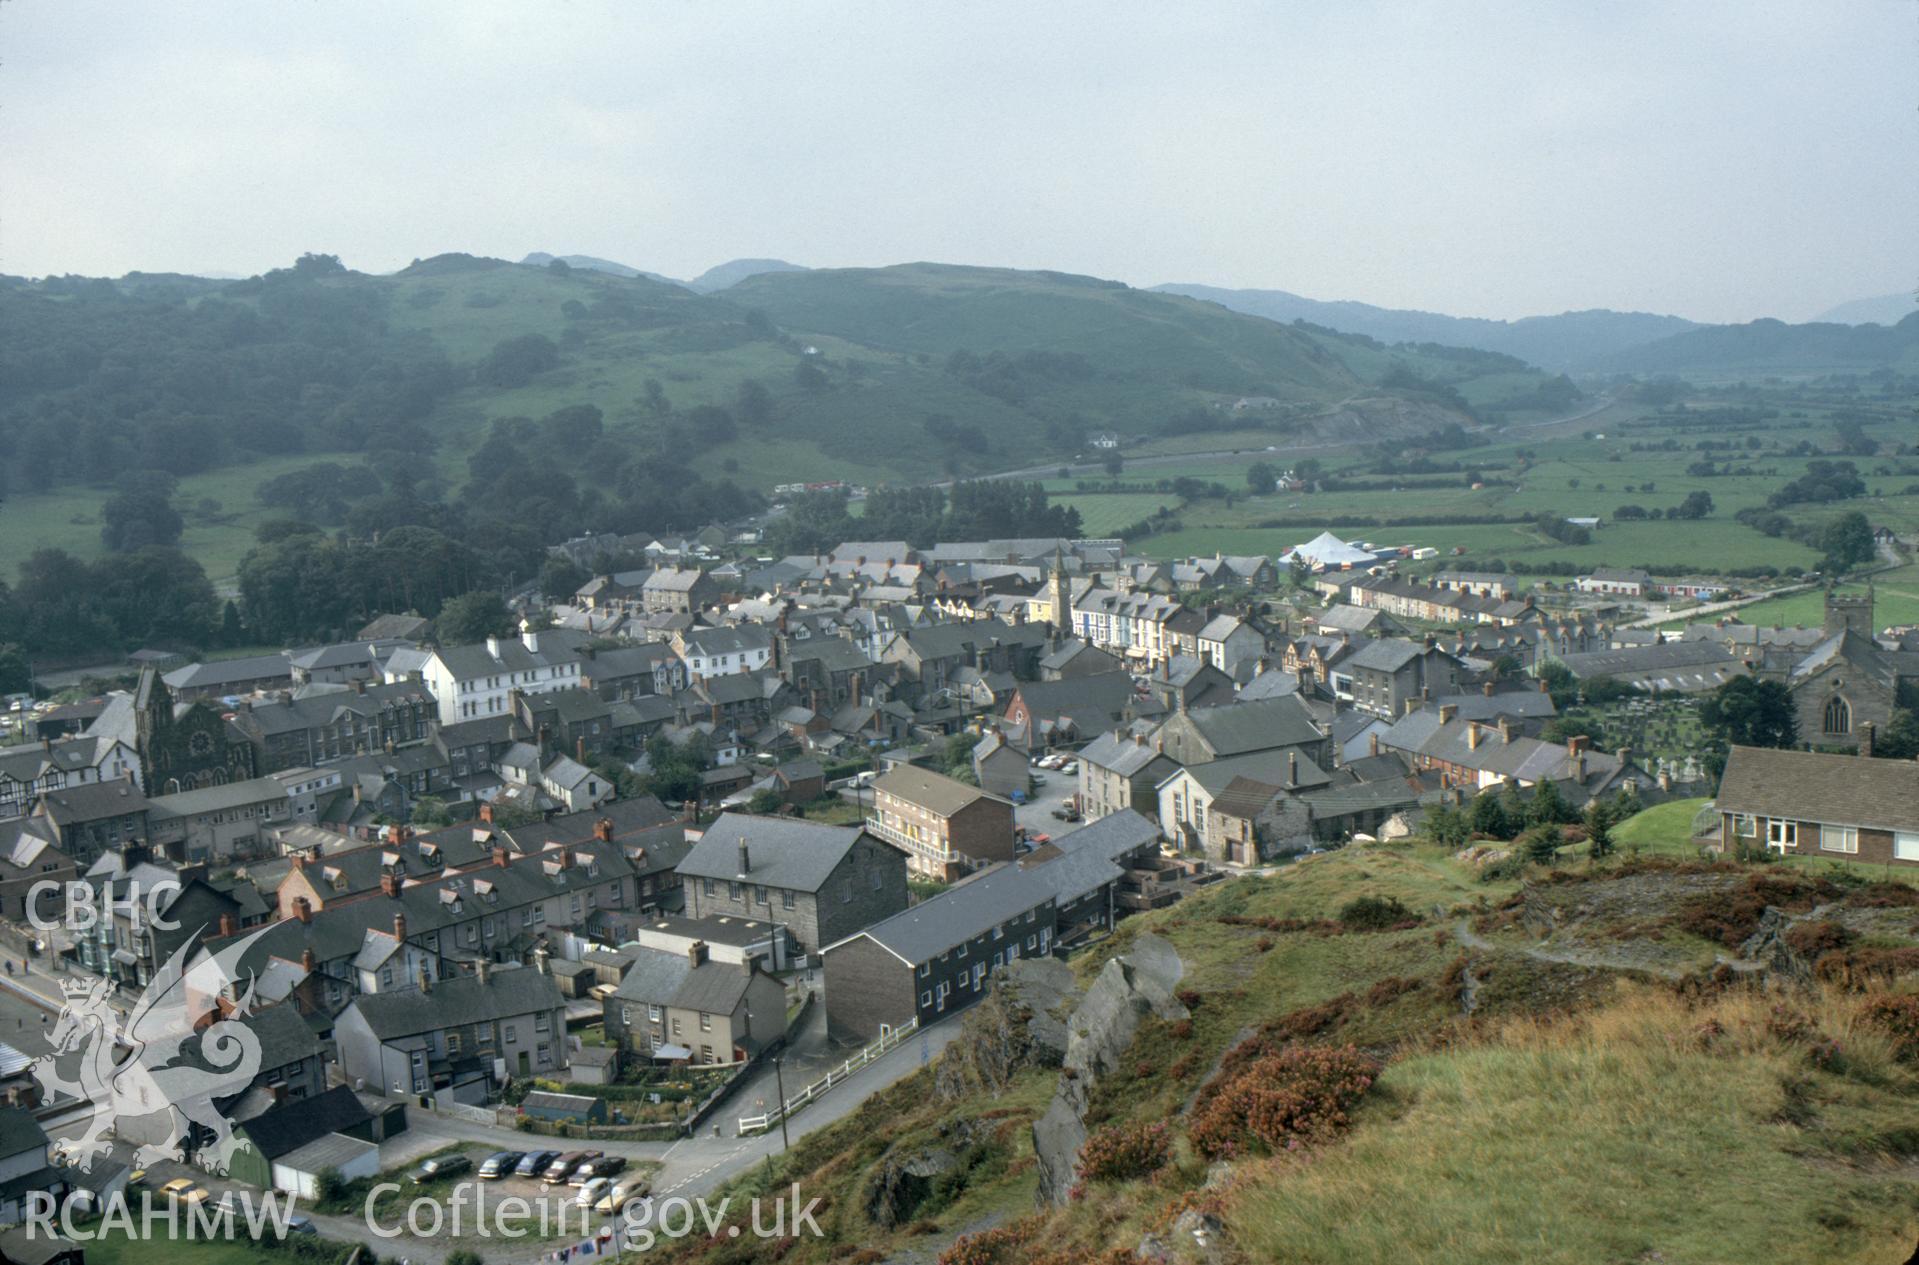 Colour photographic transparency showing aerial oblique view of Machynlleth town; collated by the former Central Office of Information.